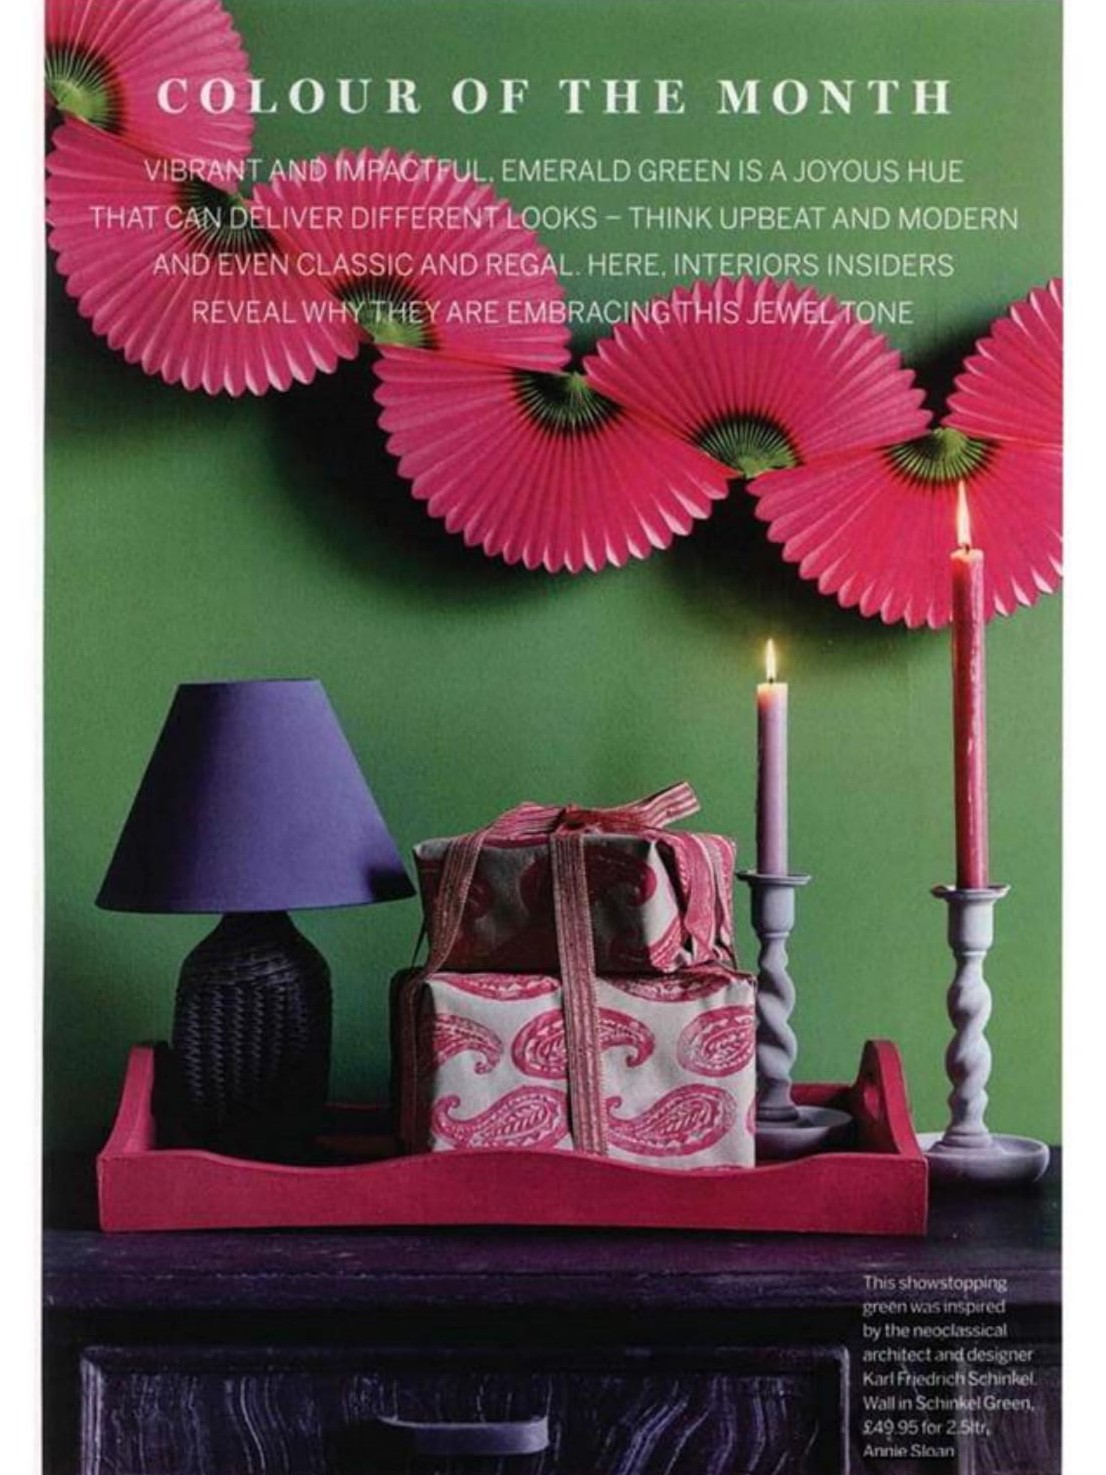 Vibrant and joyous, Annie Sloan's show-stopping Schinkel Green is Homes & Gardens' Colour of the month